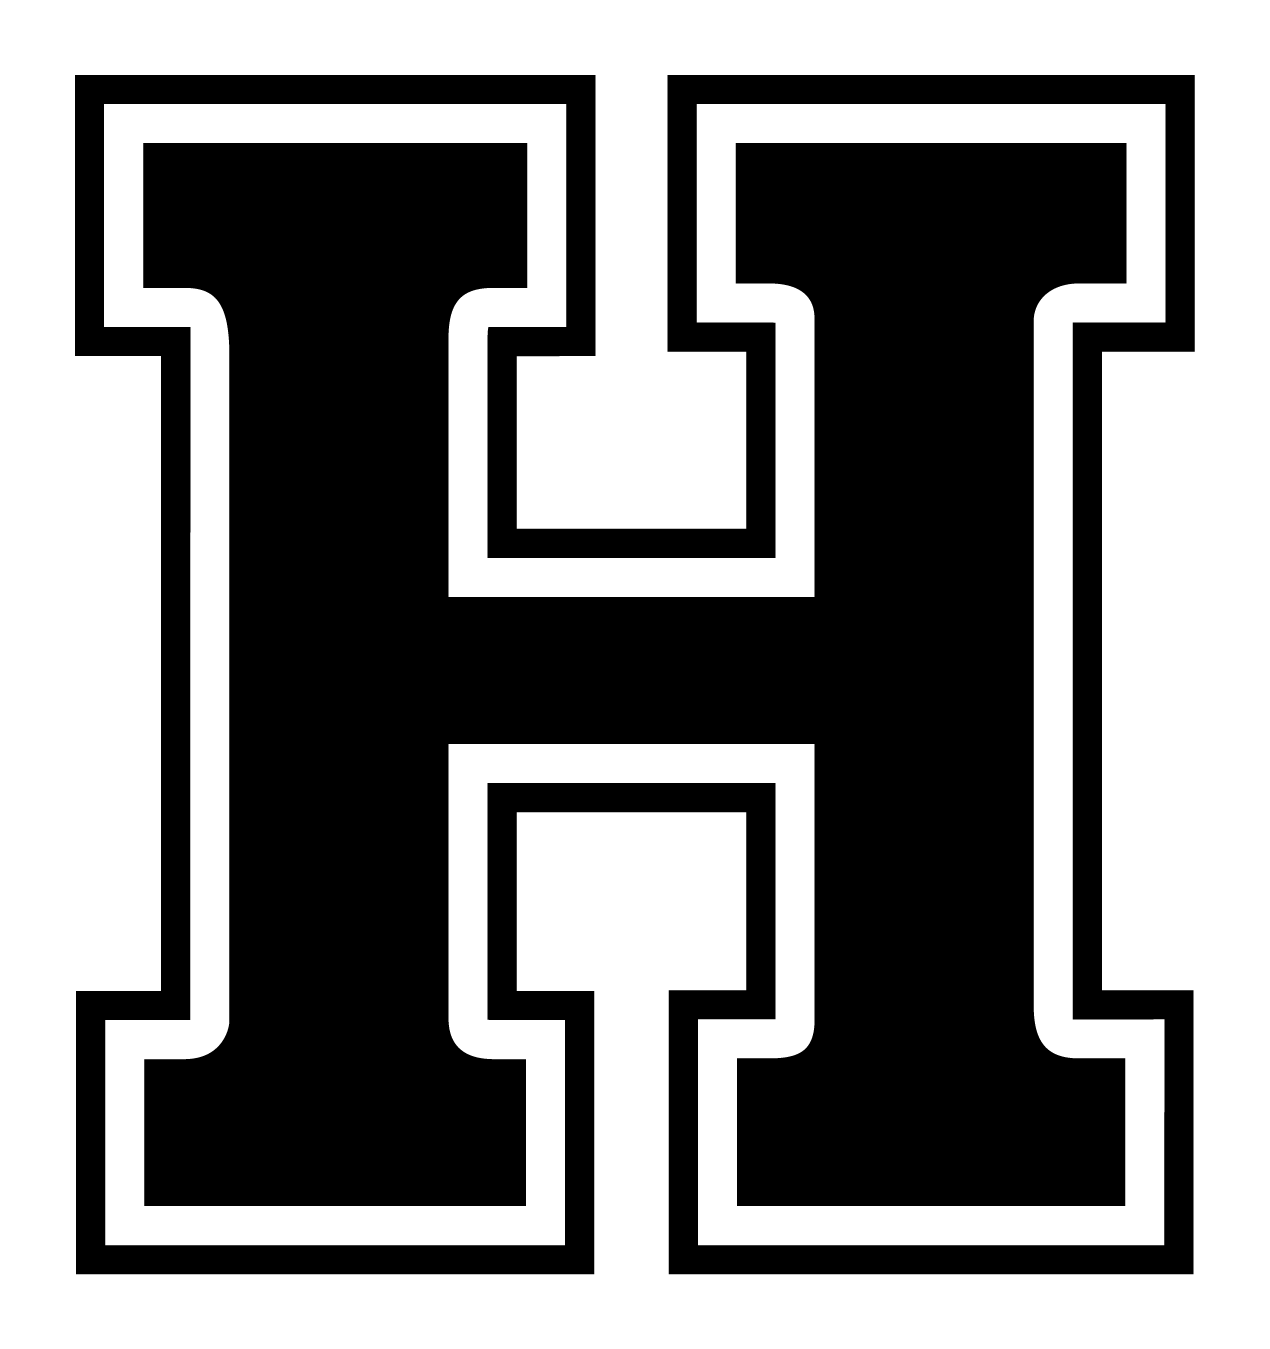 Blue and White with Orange Logo - Downloadable Athletics Logos | Hope College